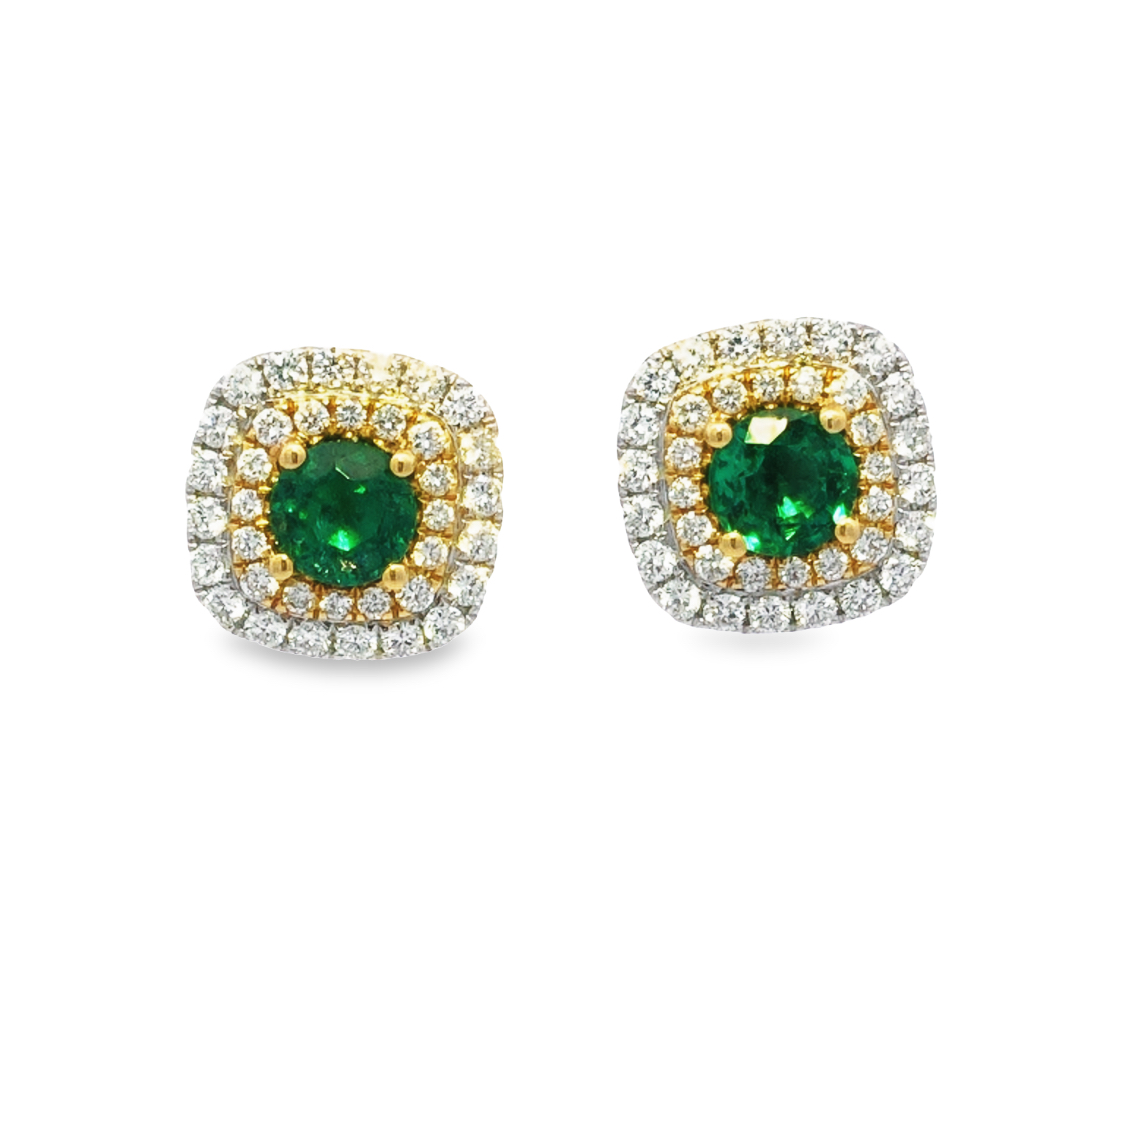 18K White and Yellow Gold Emearld and Diamond Earrings